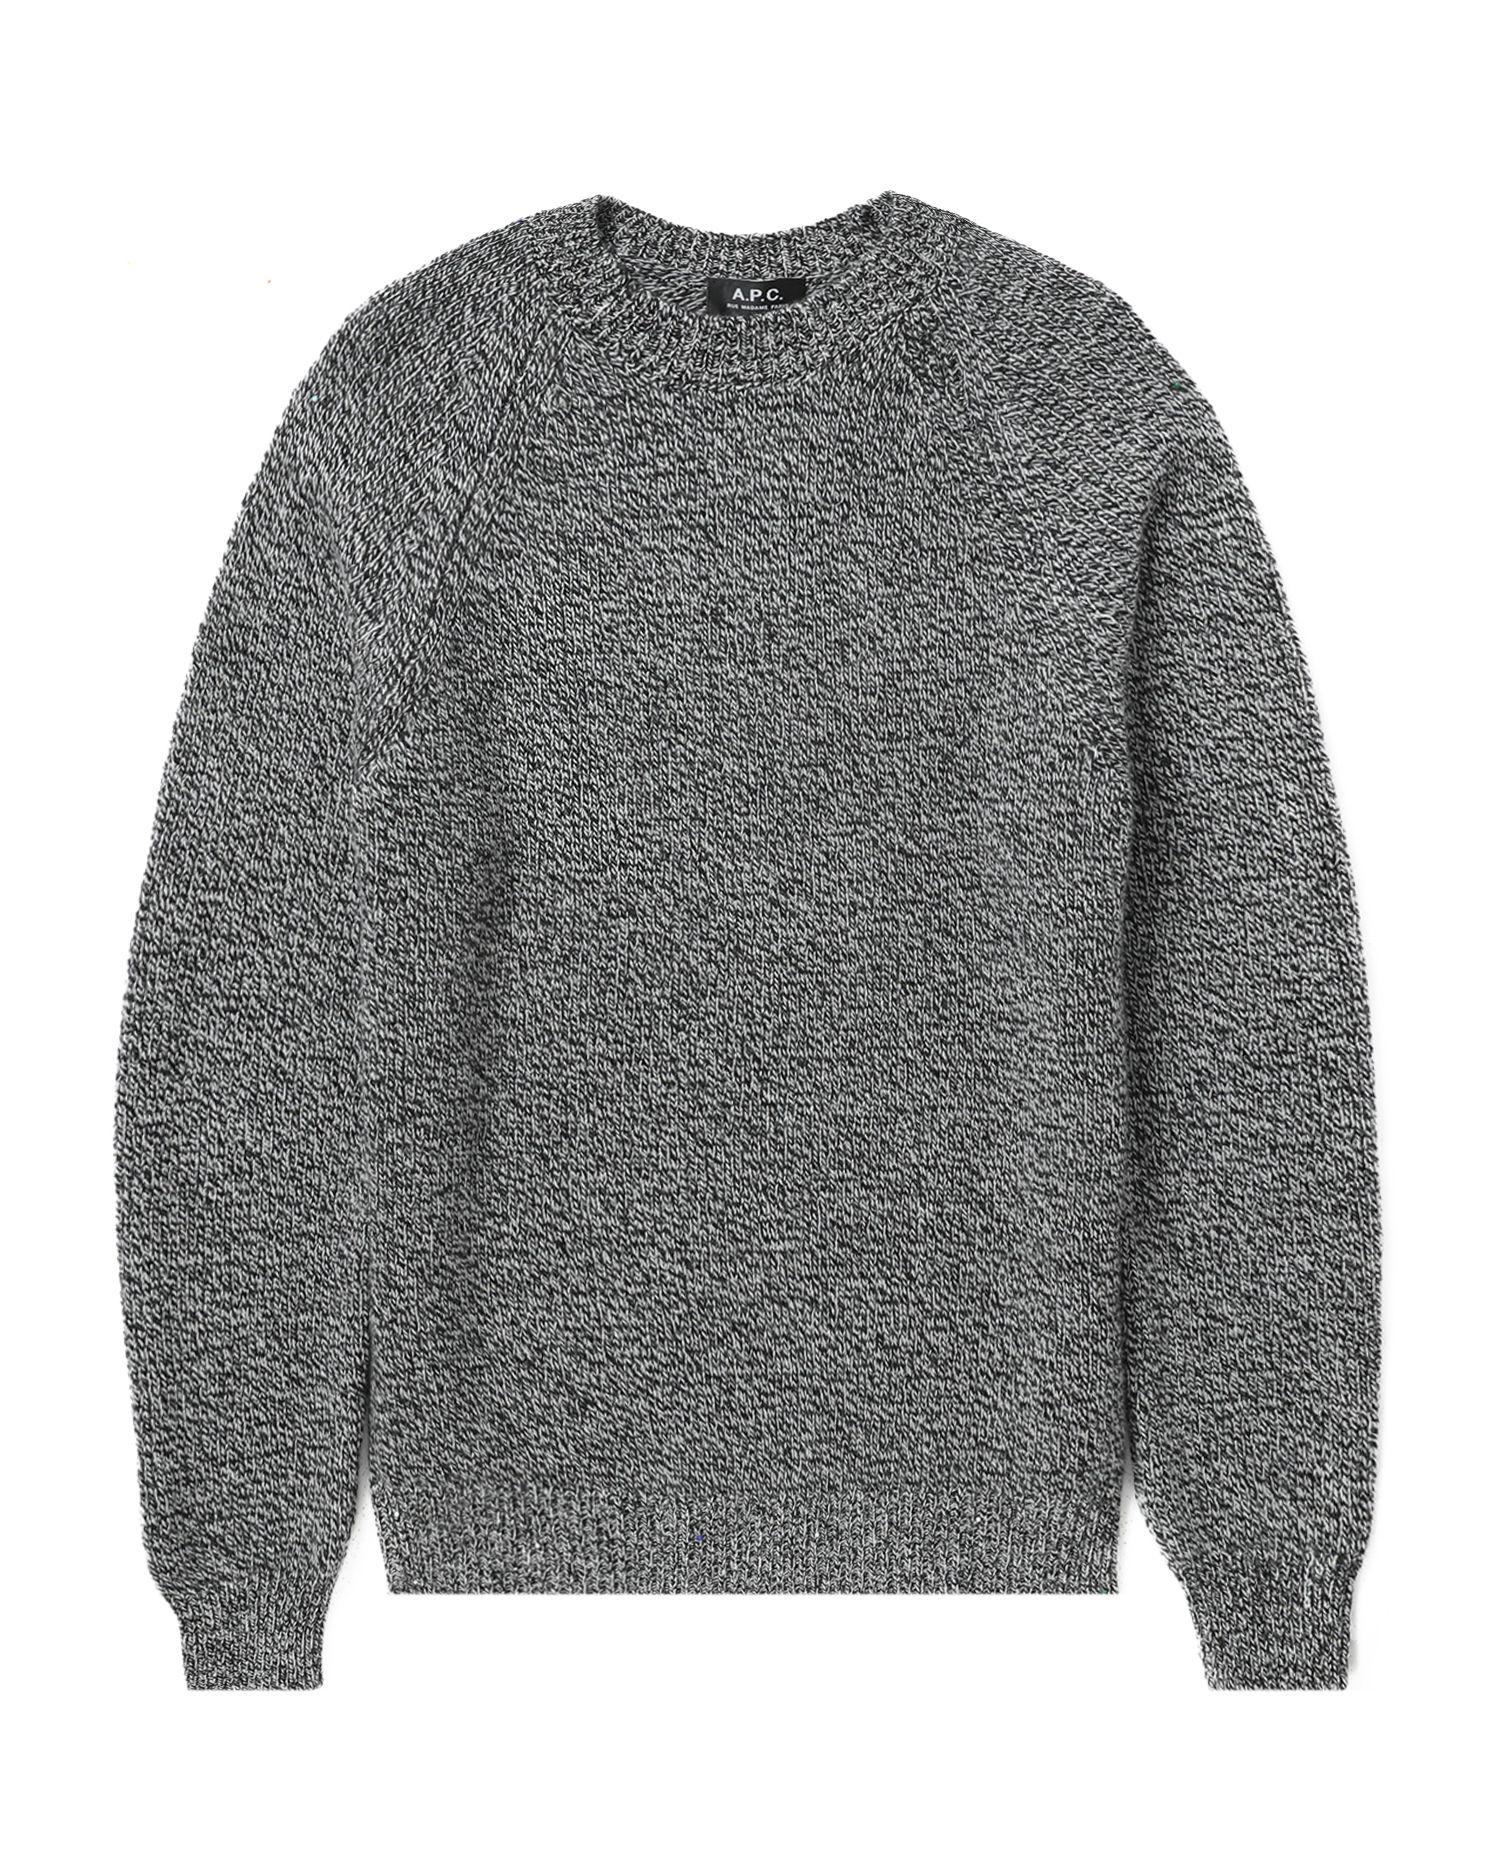 Pierre jumper by A.P.C.